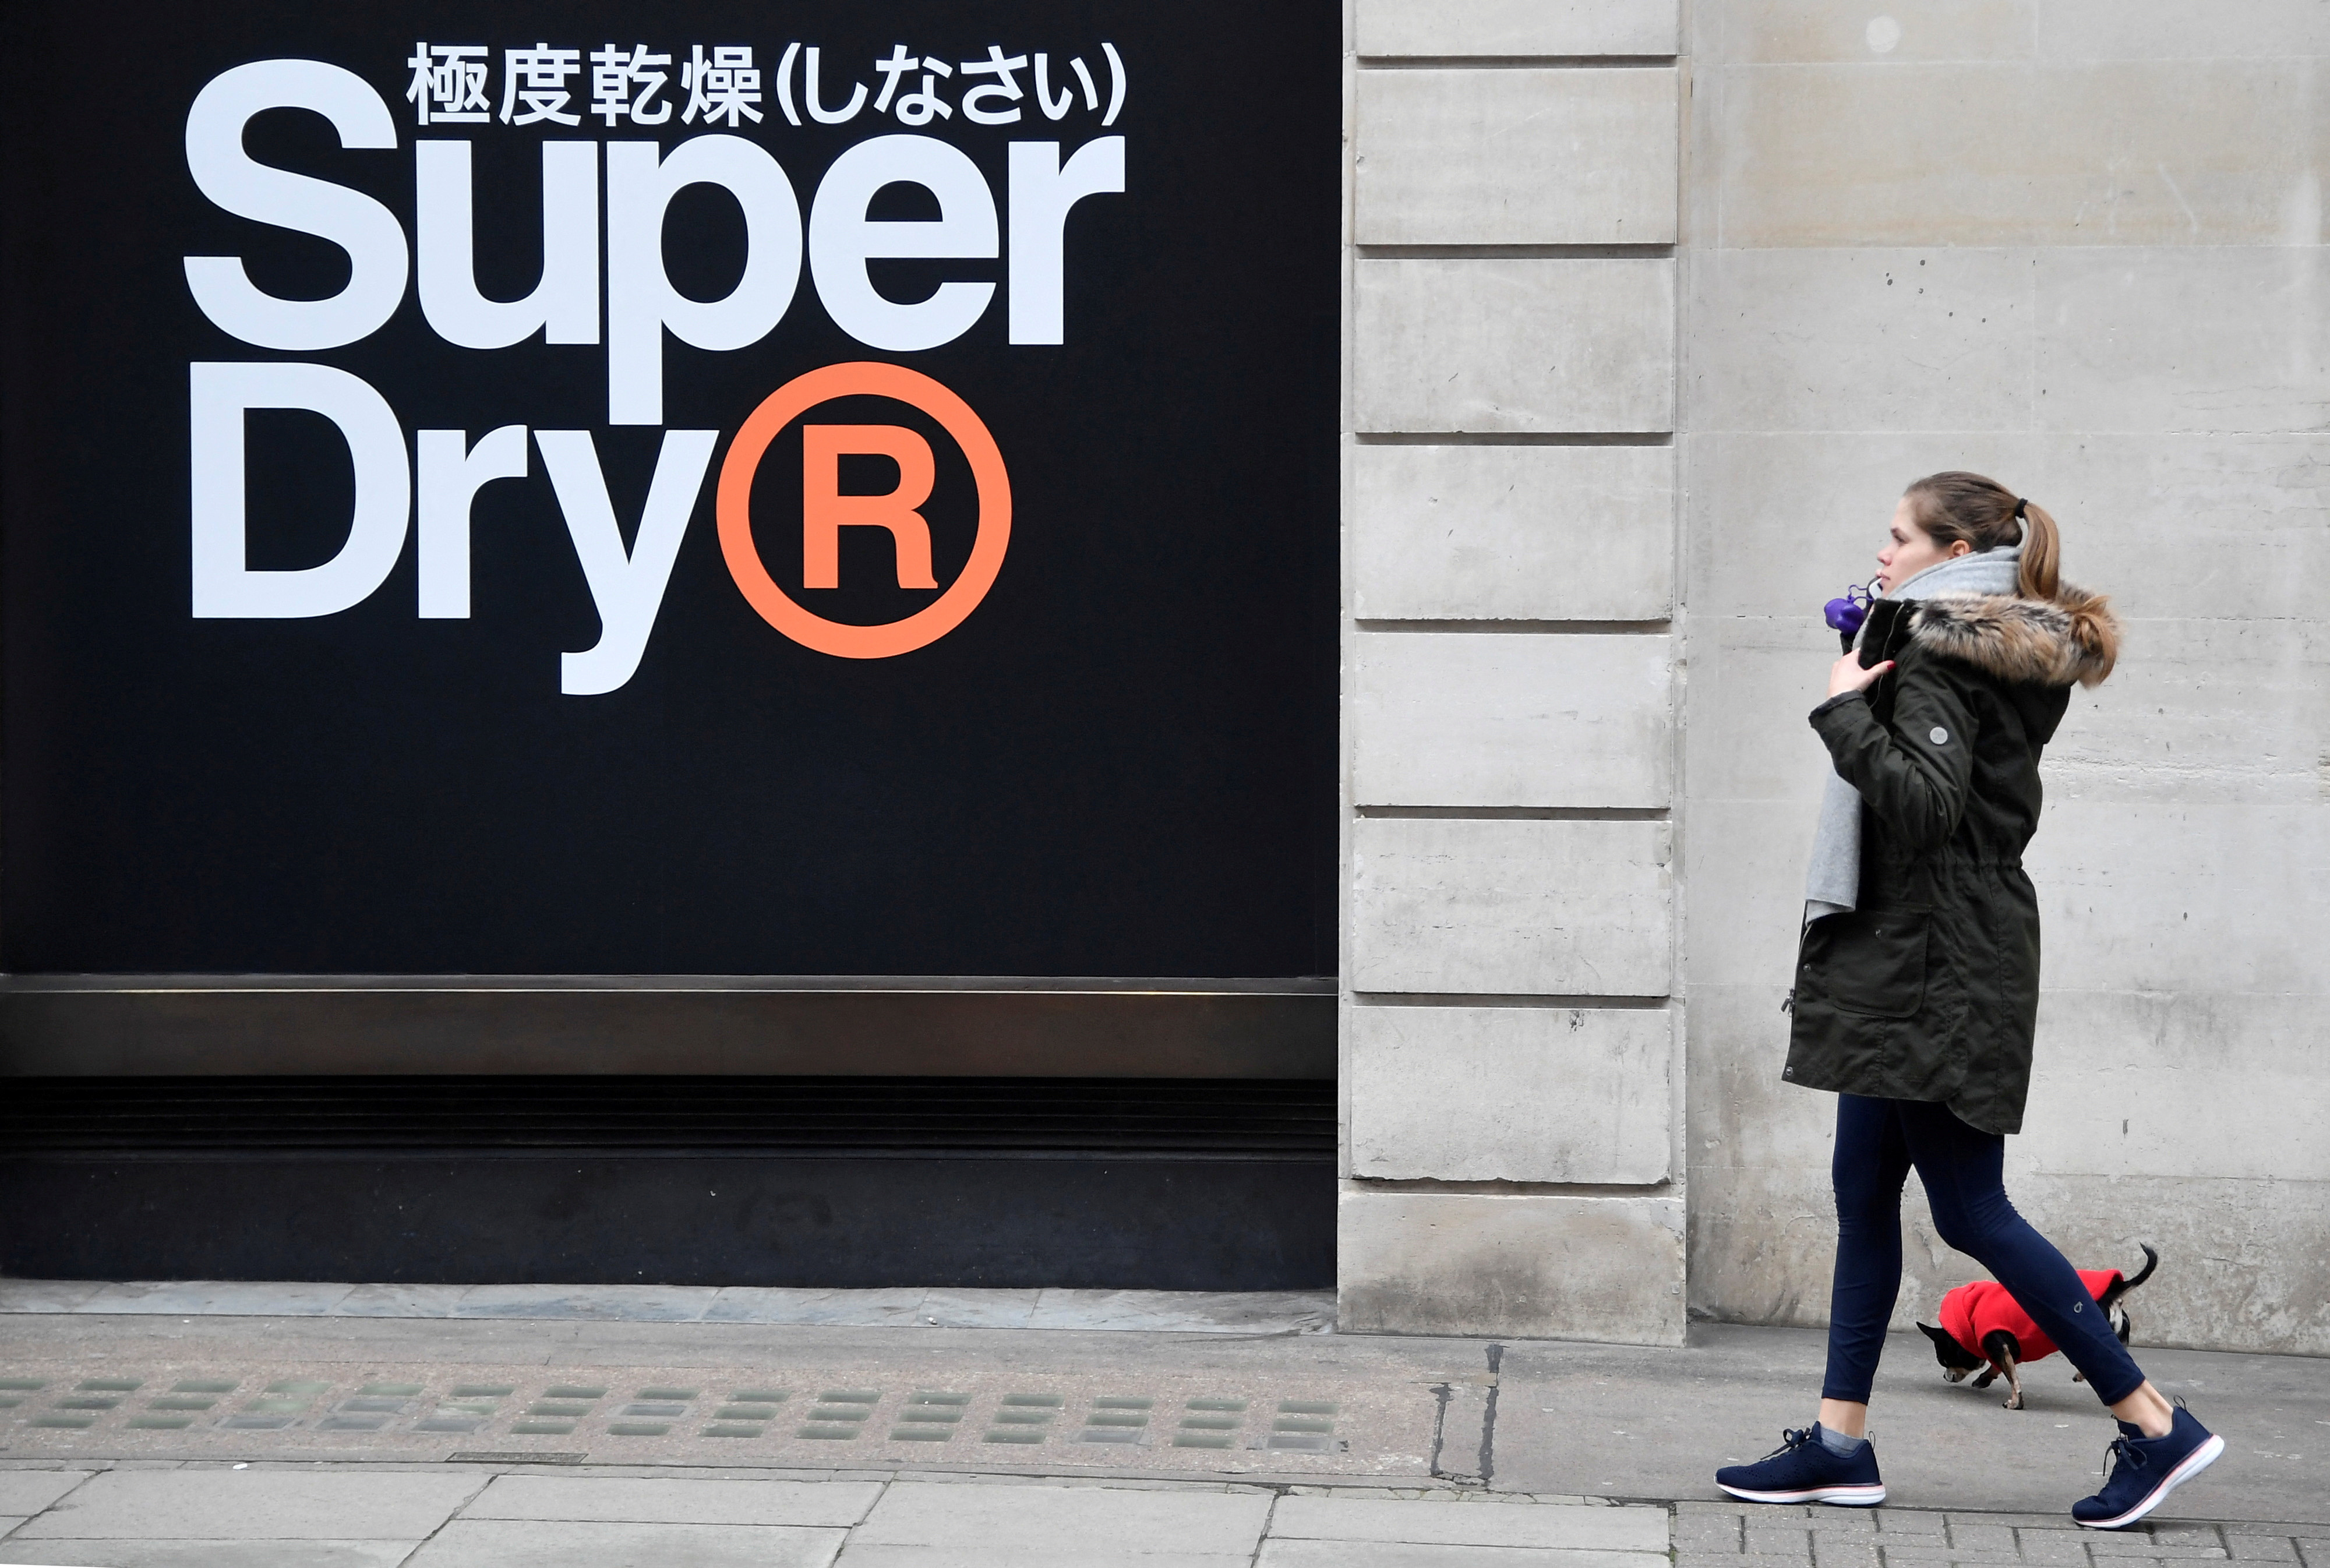 Inside look: Can trend forecasting get Superdry back on top?